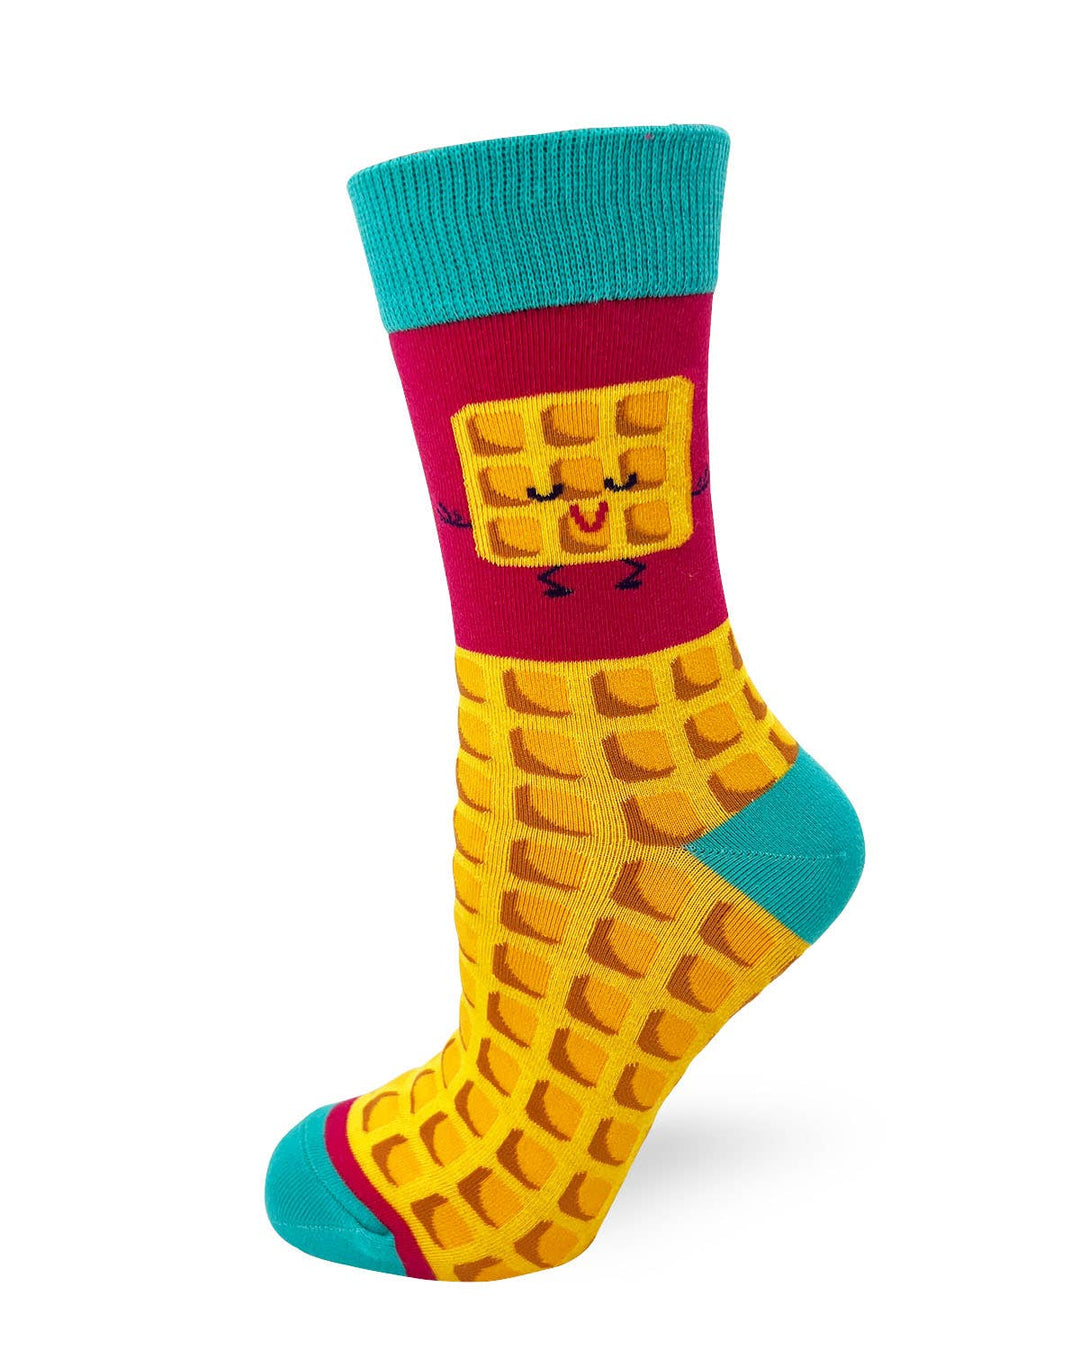 Fabdaz - Funny ladies' crew socks with saying "Don't Be a Twatwaffle"